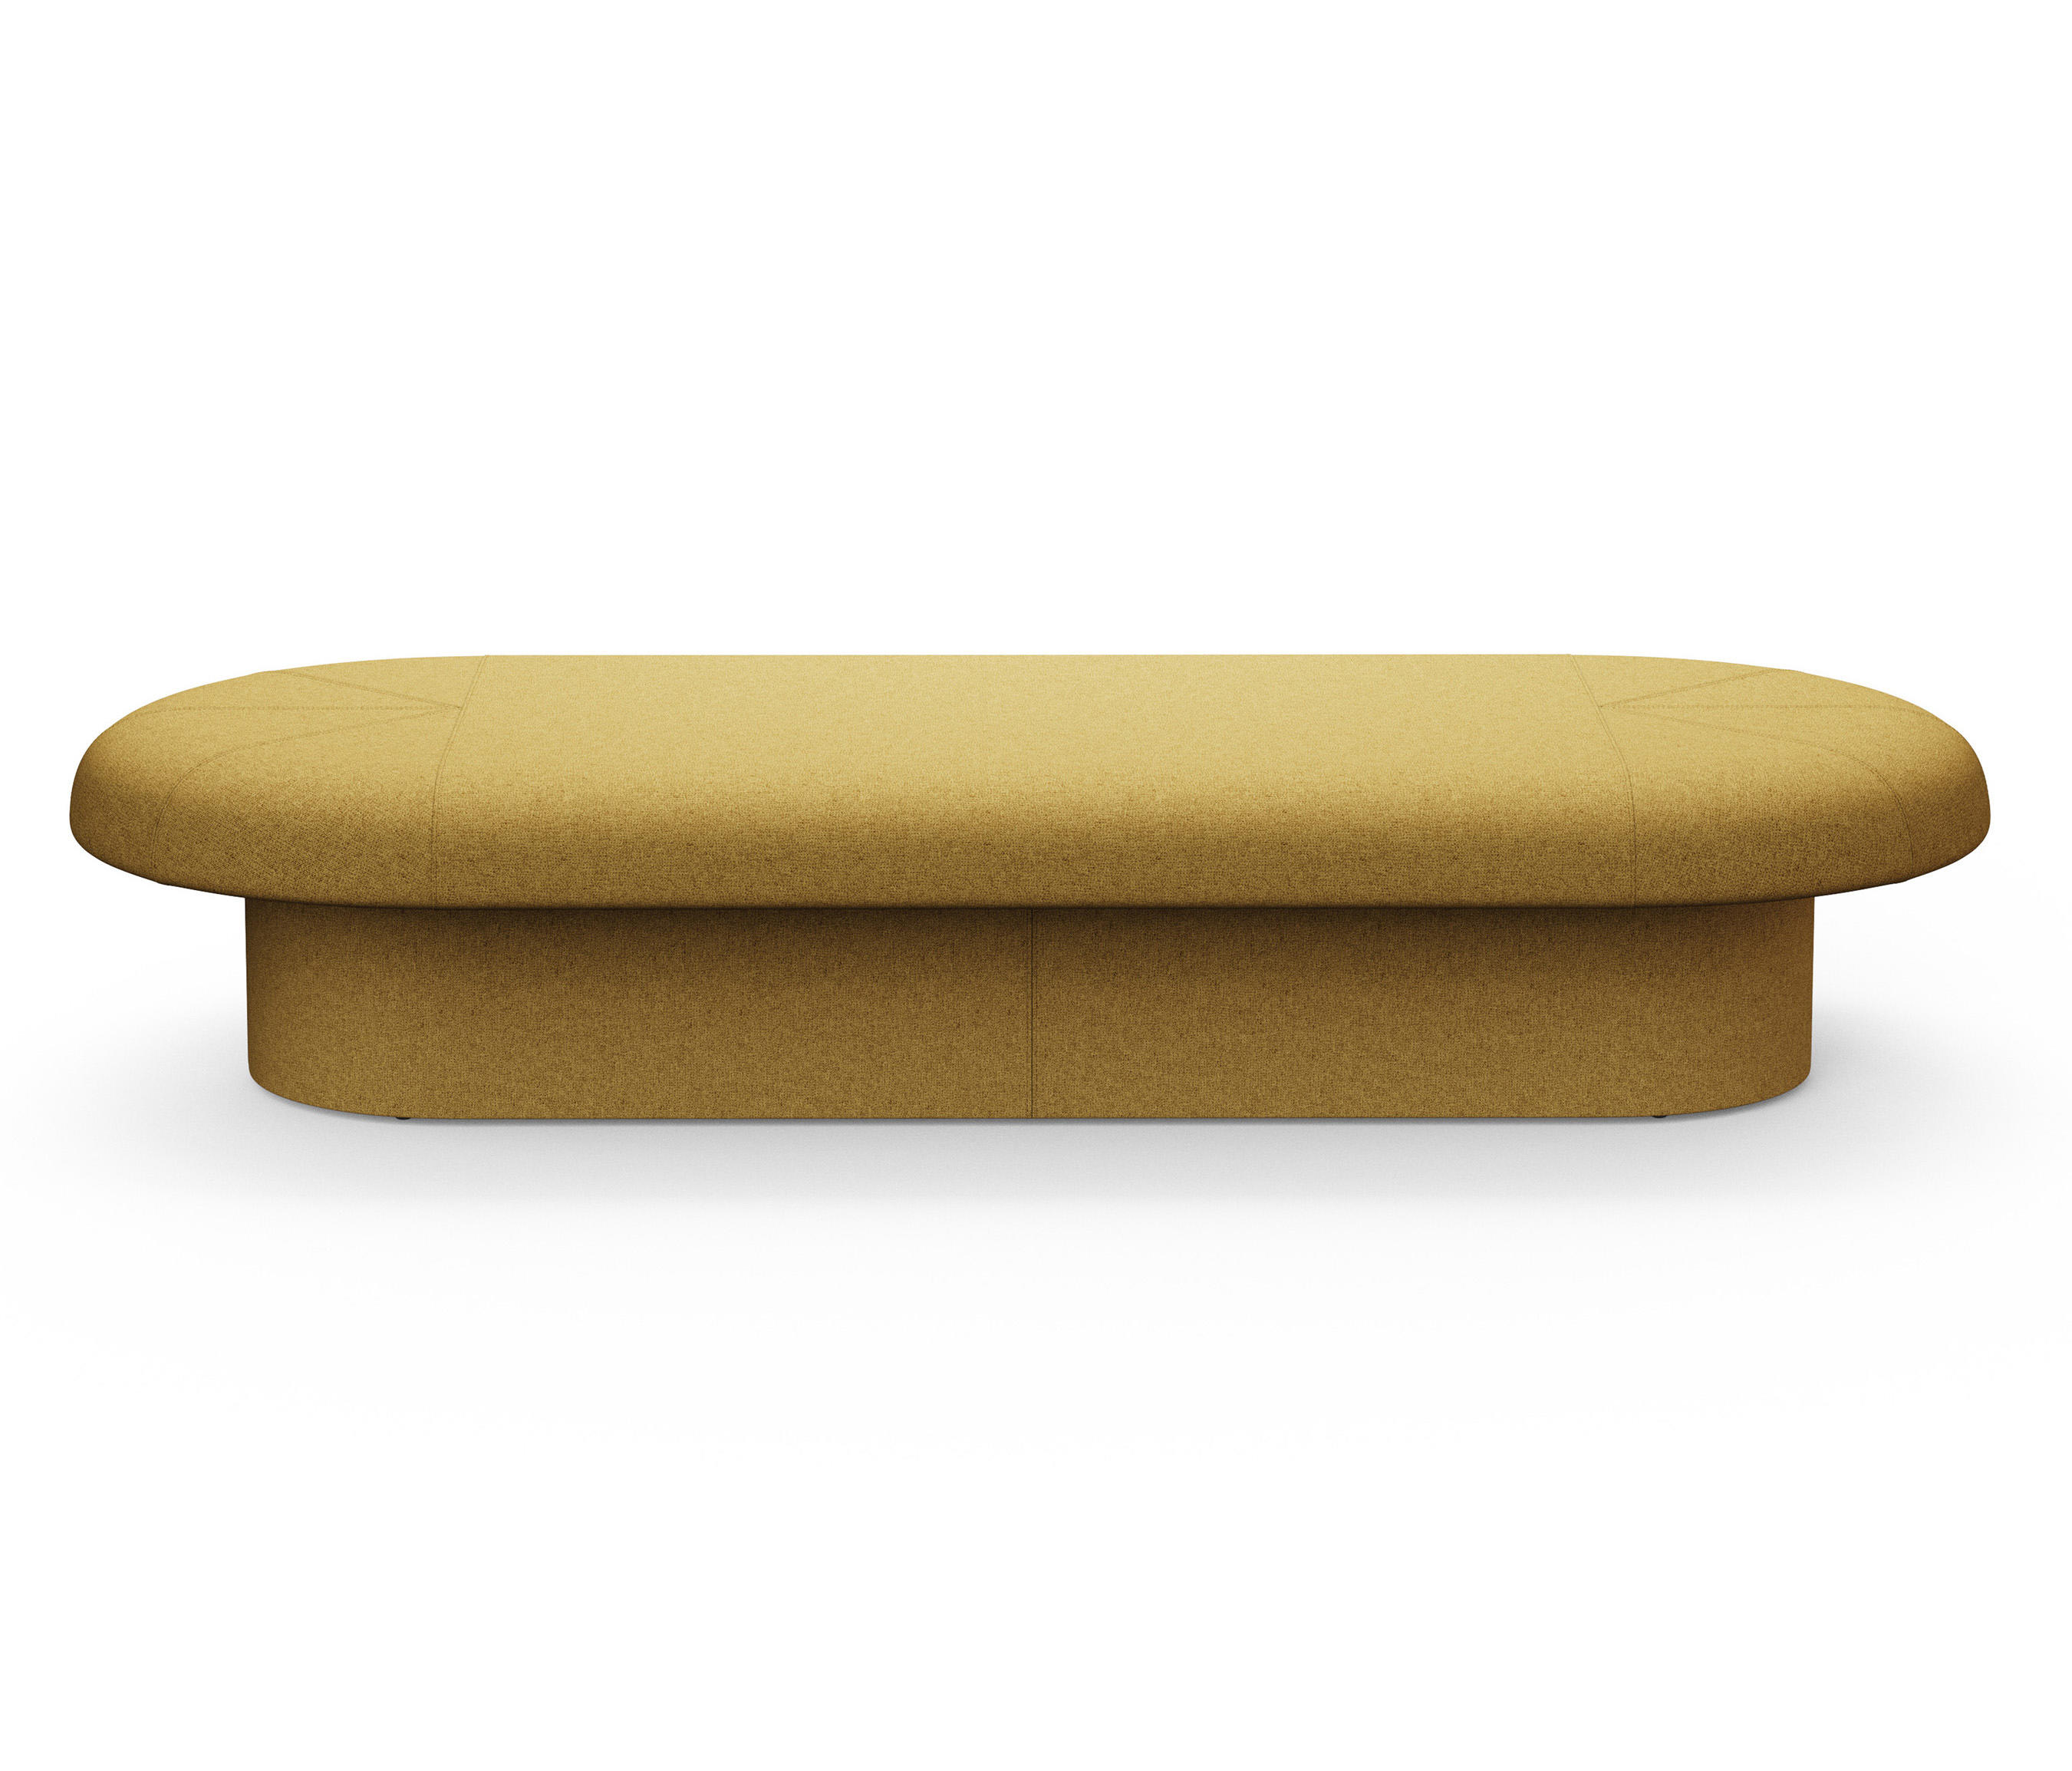 DRAGE BENCH - Seating islands from B&T Design | Architonic